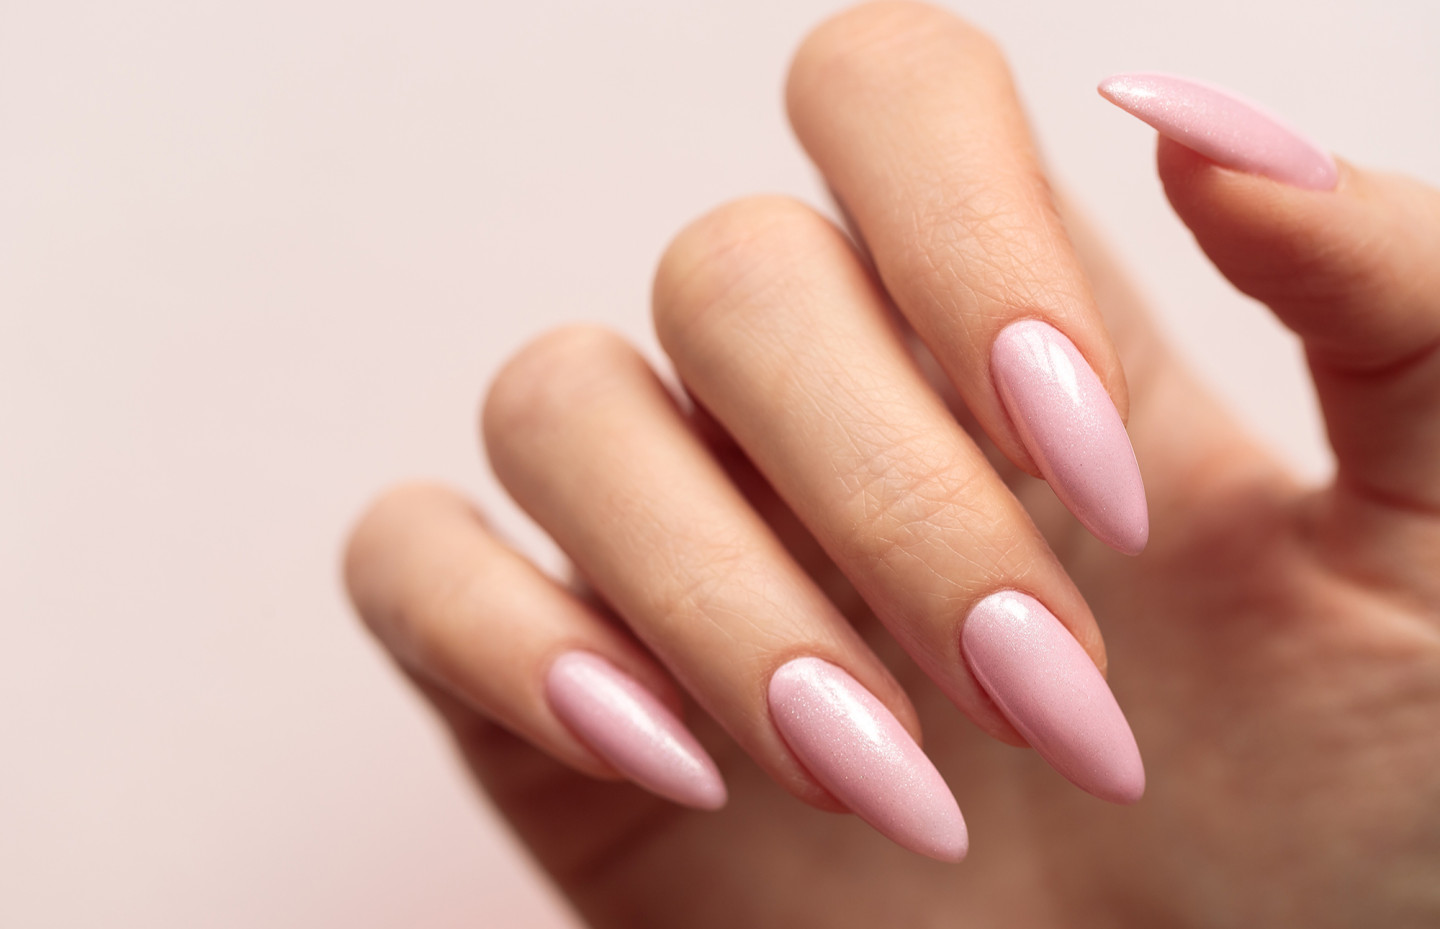 How to choose a nail shape: tips from a manicurist